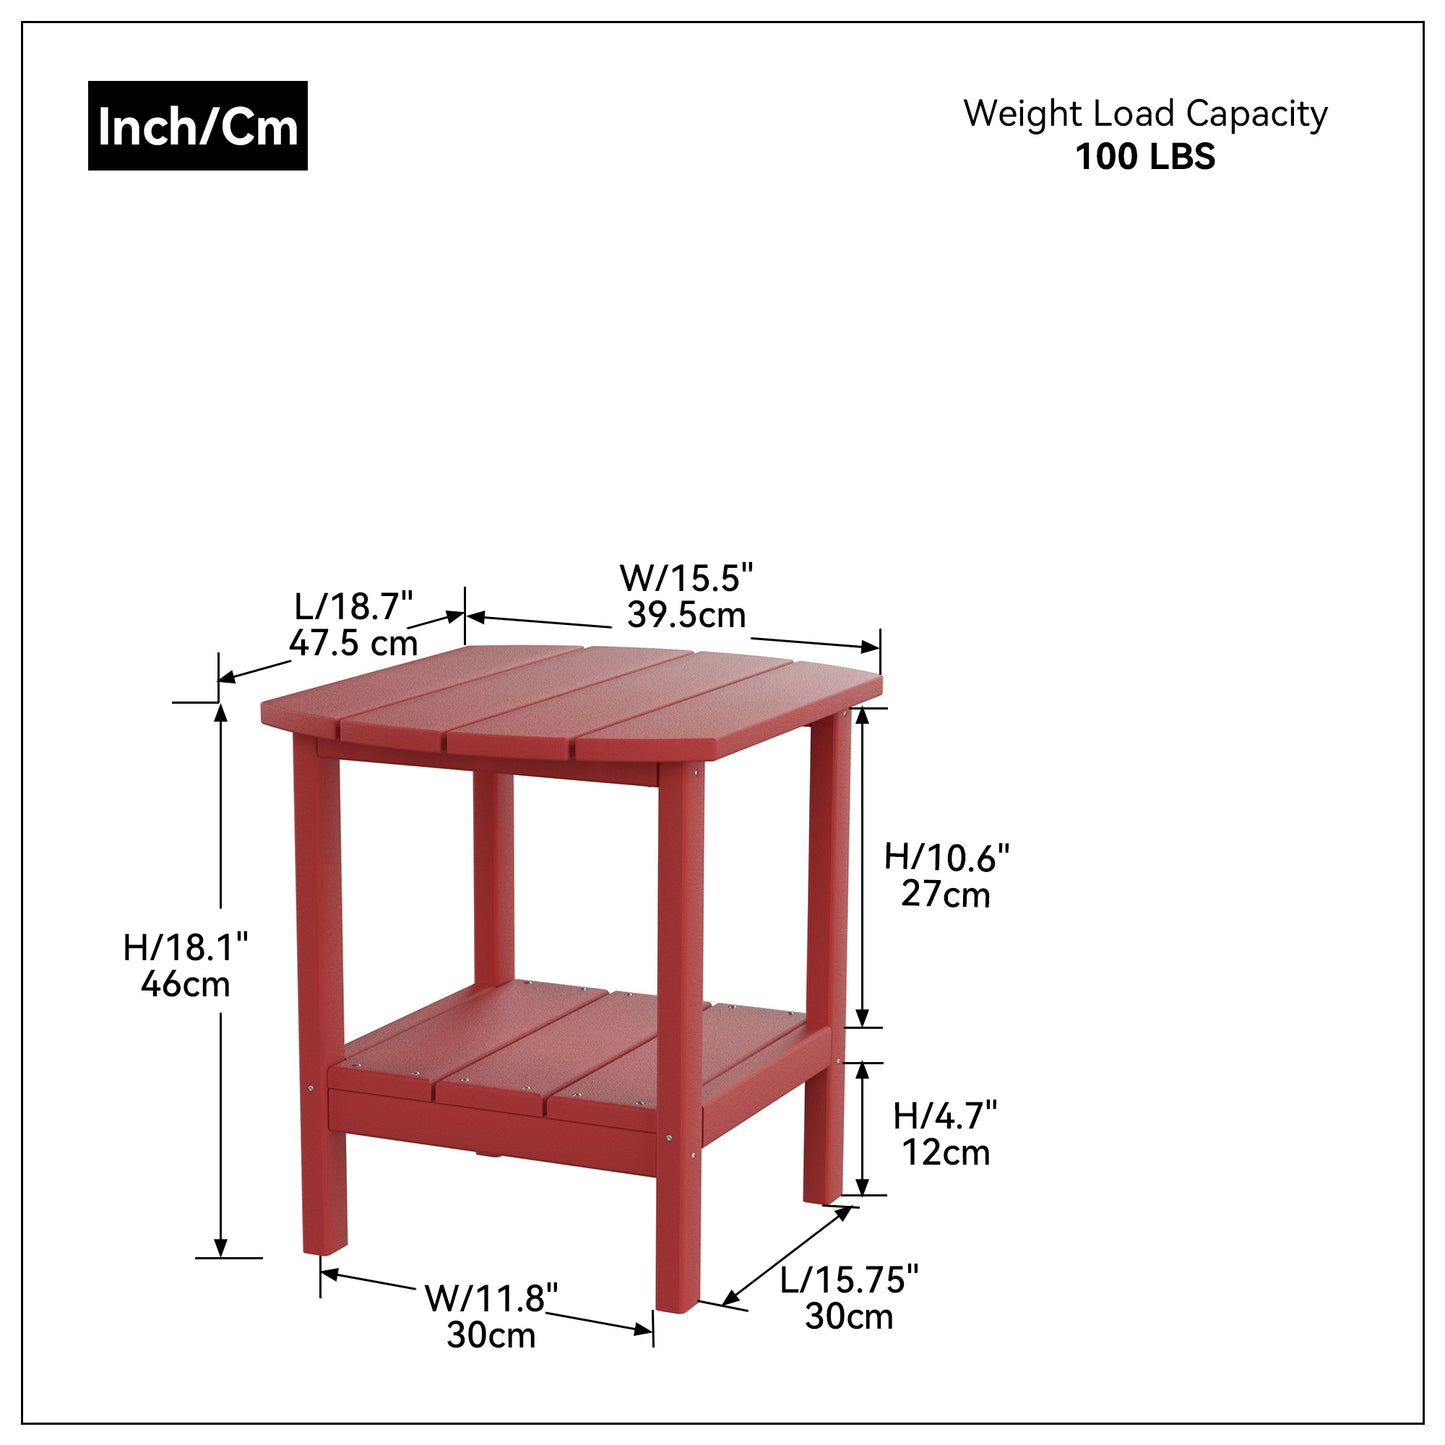 HDPE side table,adirondack table,porch table, patio table for outdoor and pool Red